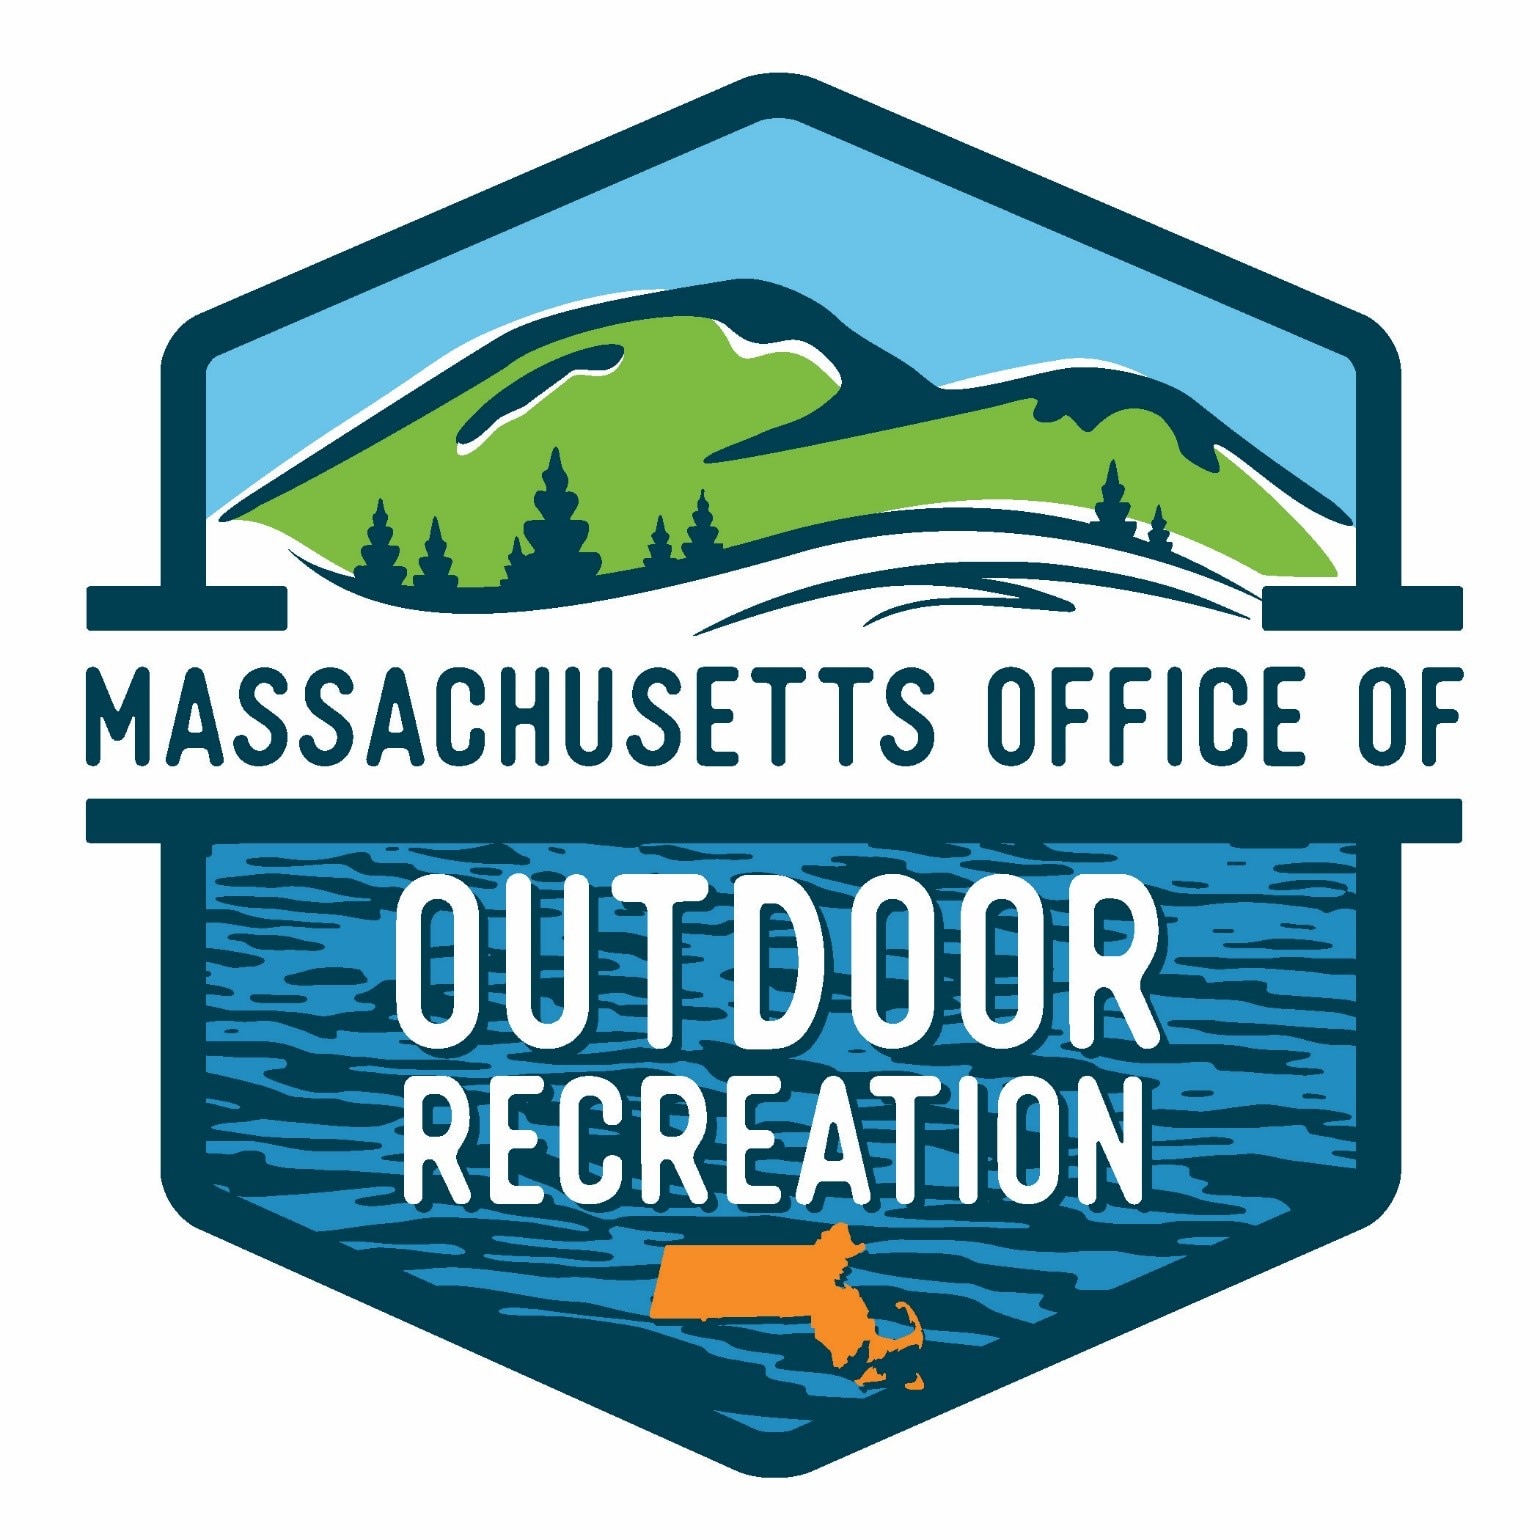 Baker-Polito Administration Launches Massachusetts Office of Outdoor Recreation